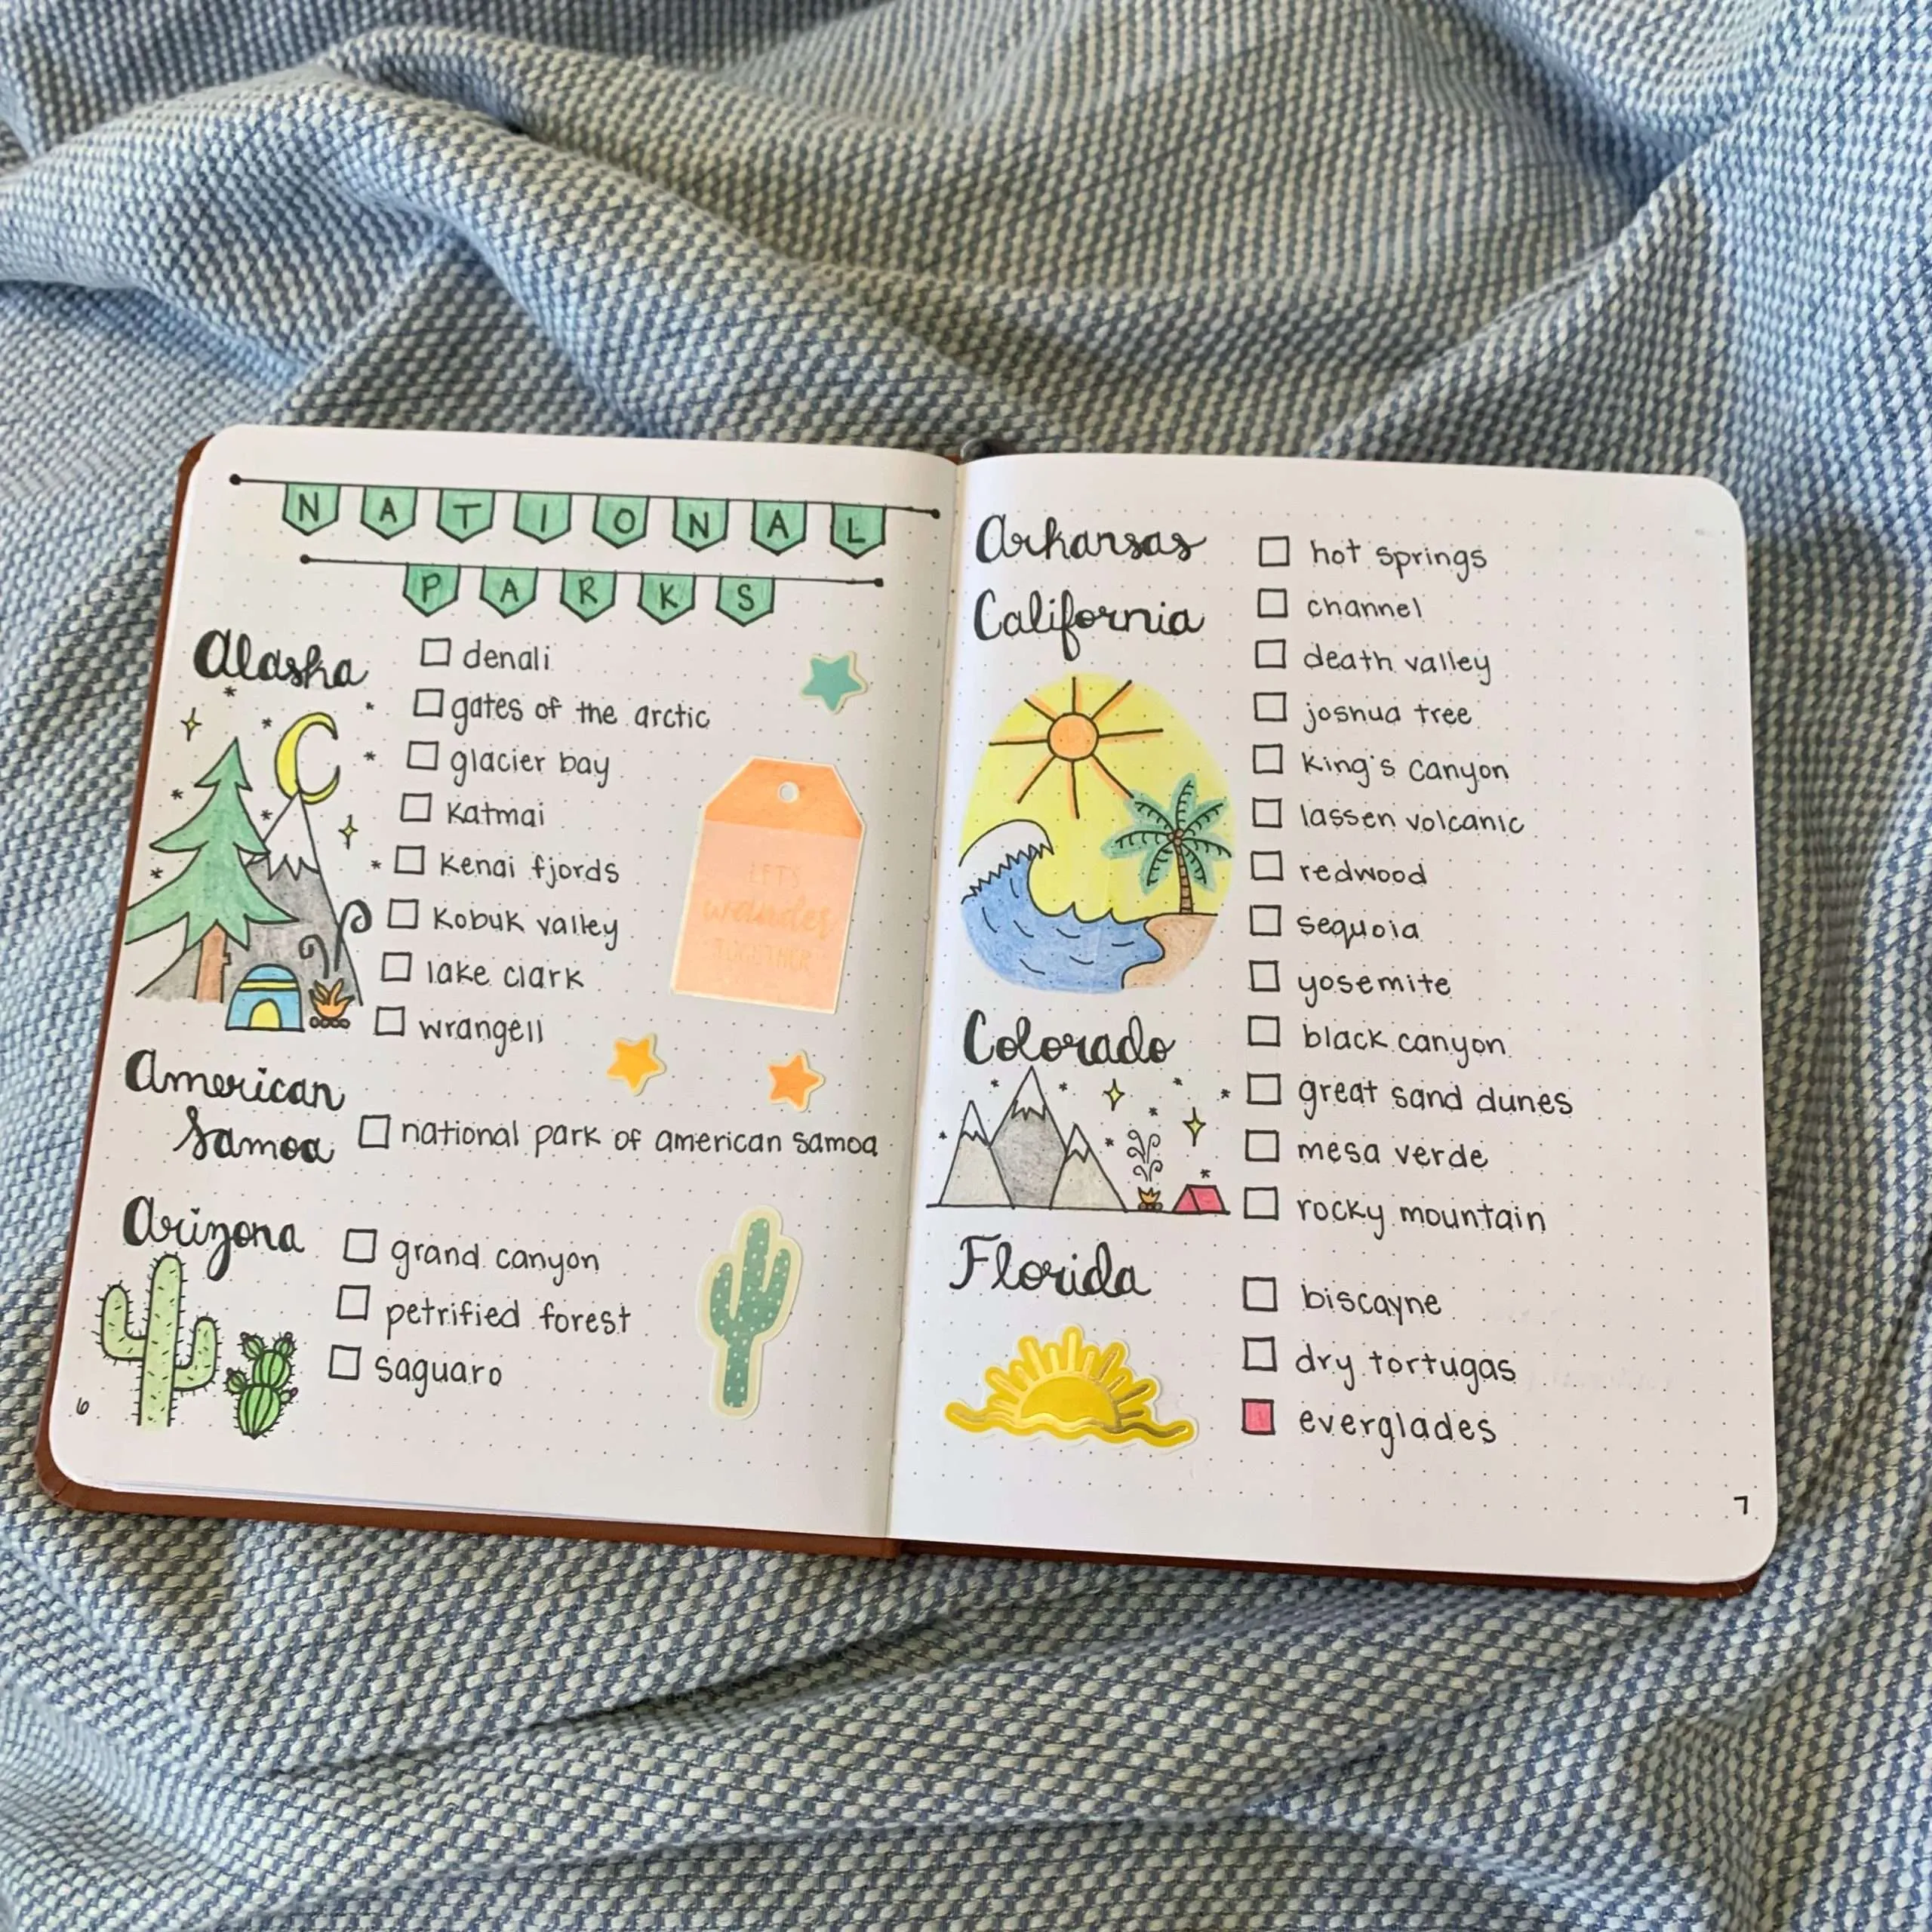 List of national parks in my travel bullet journal.